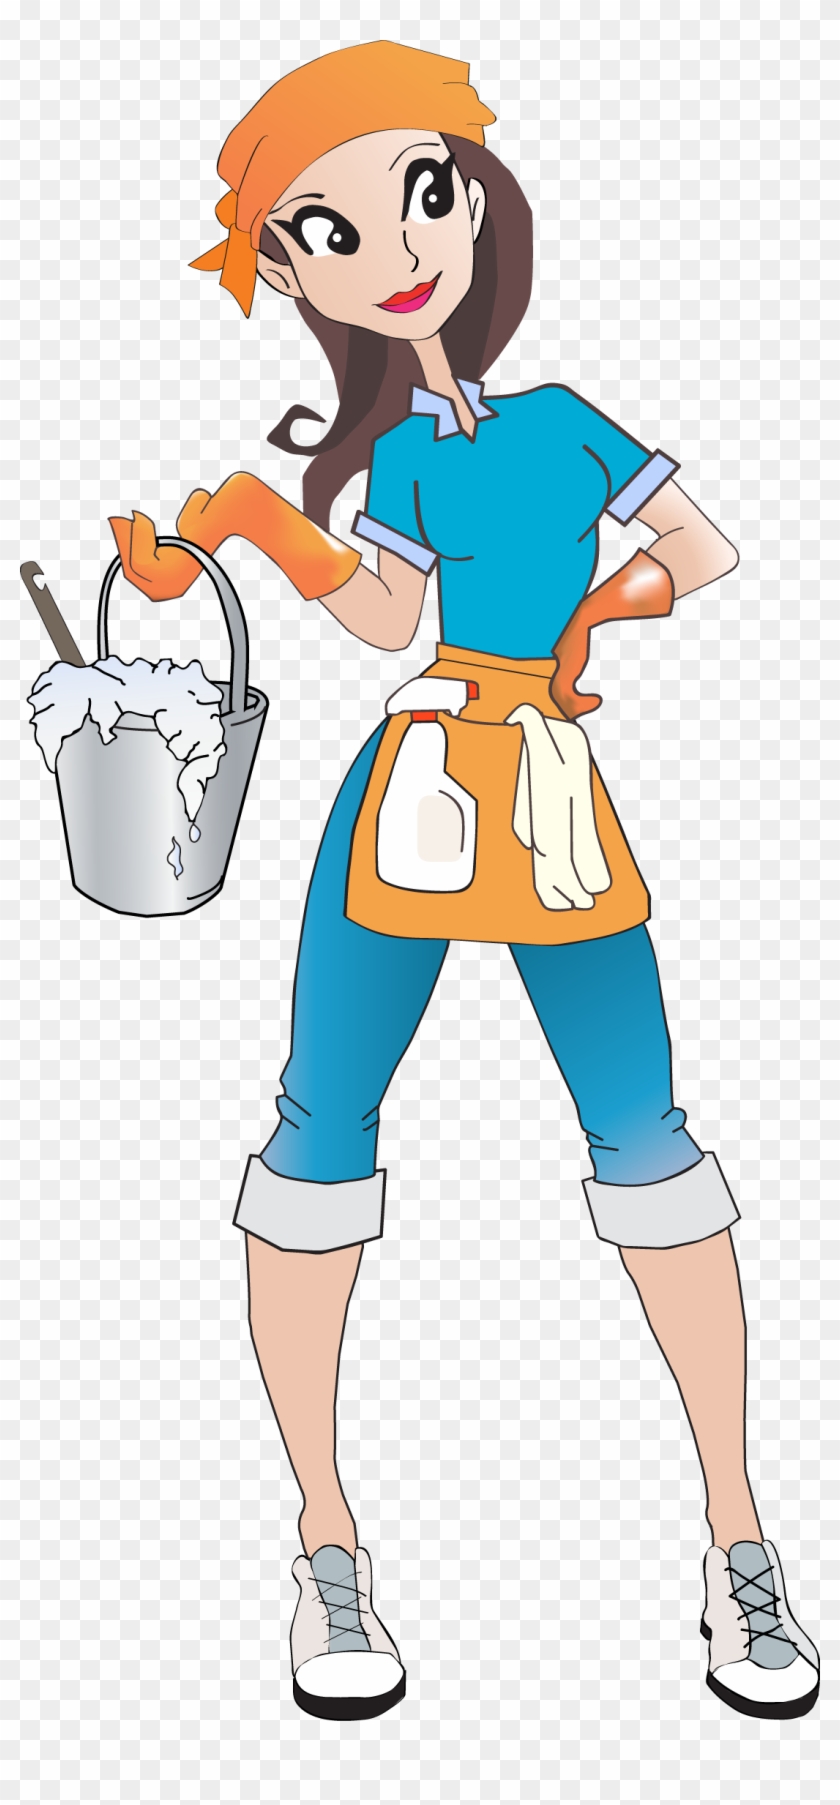 Maid Png - Cleaning Services Images Free #465949